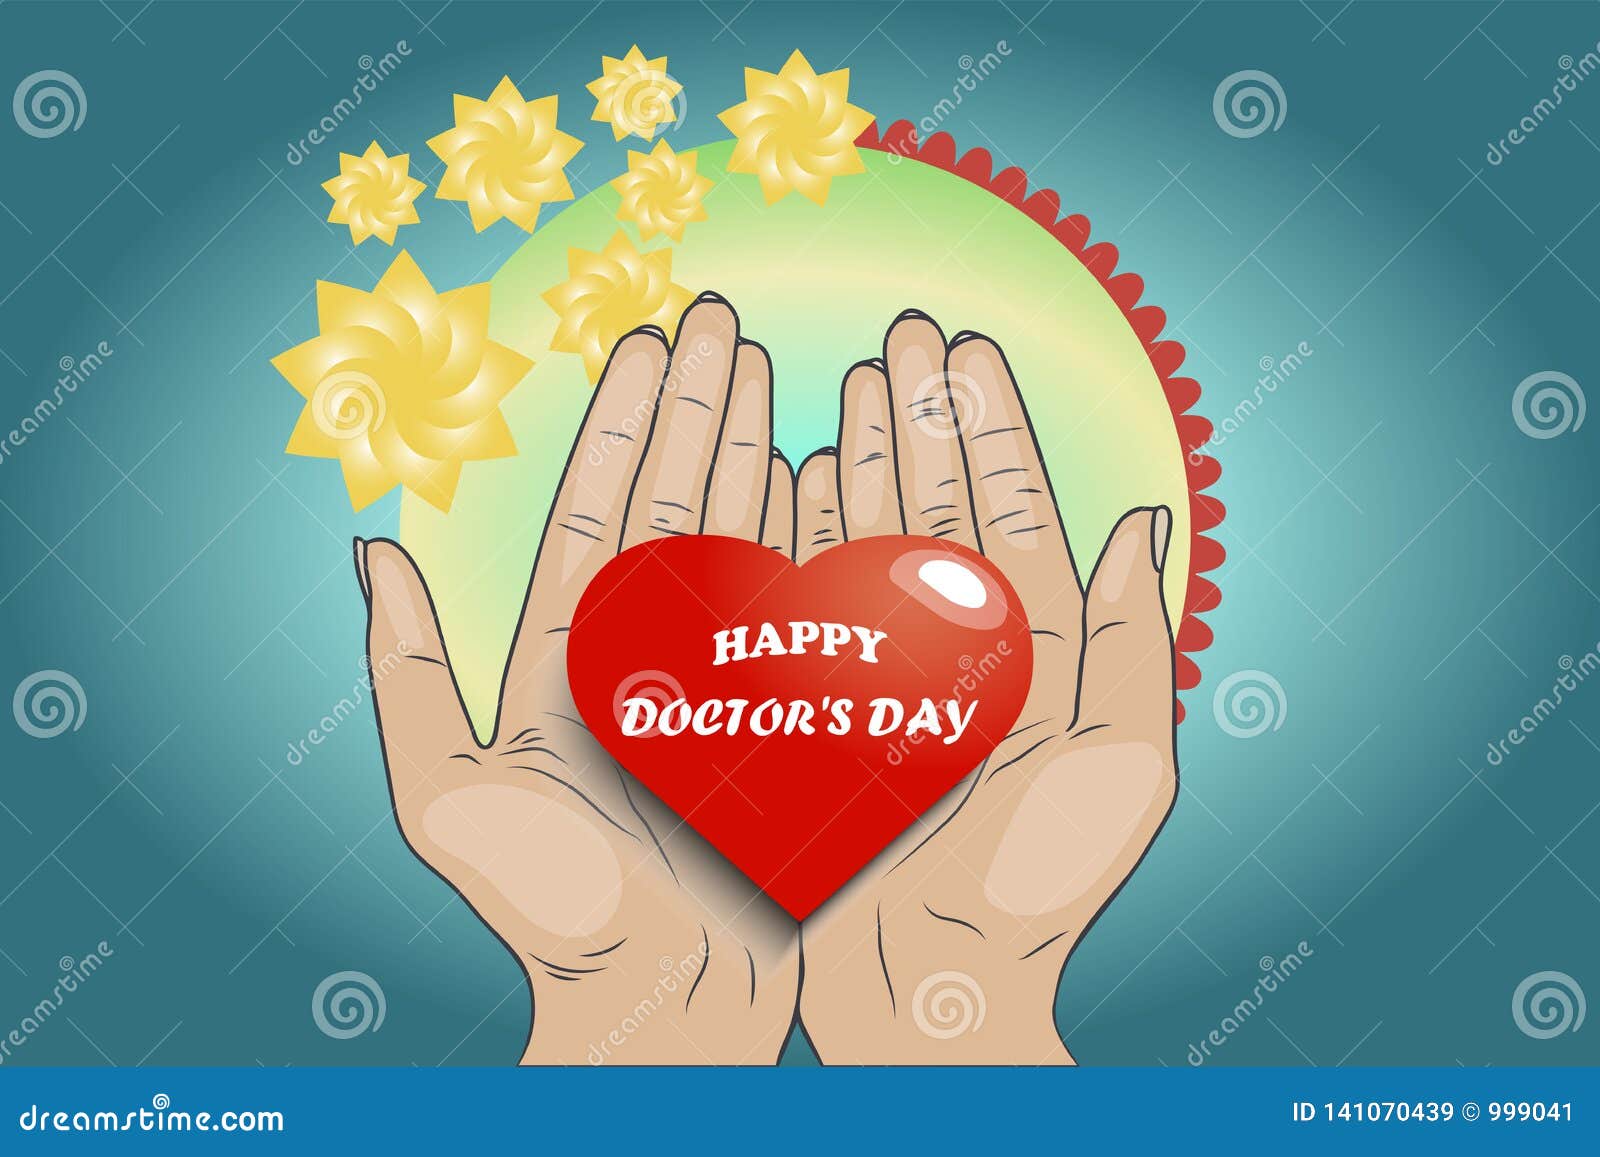 doctor day drawing. doctors day poster making | By Easy Drawing SA |  Facebook